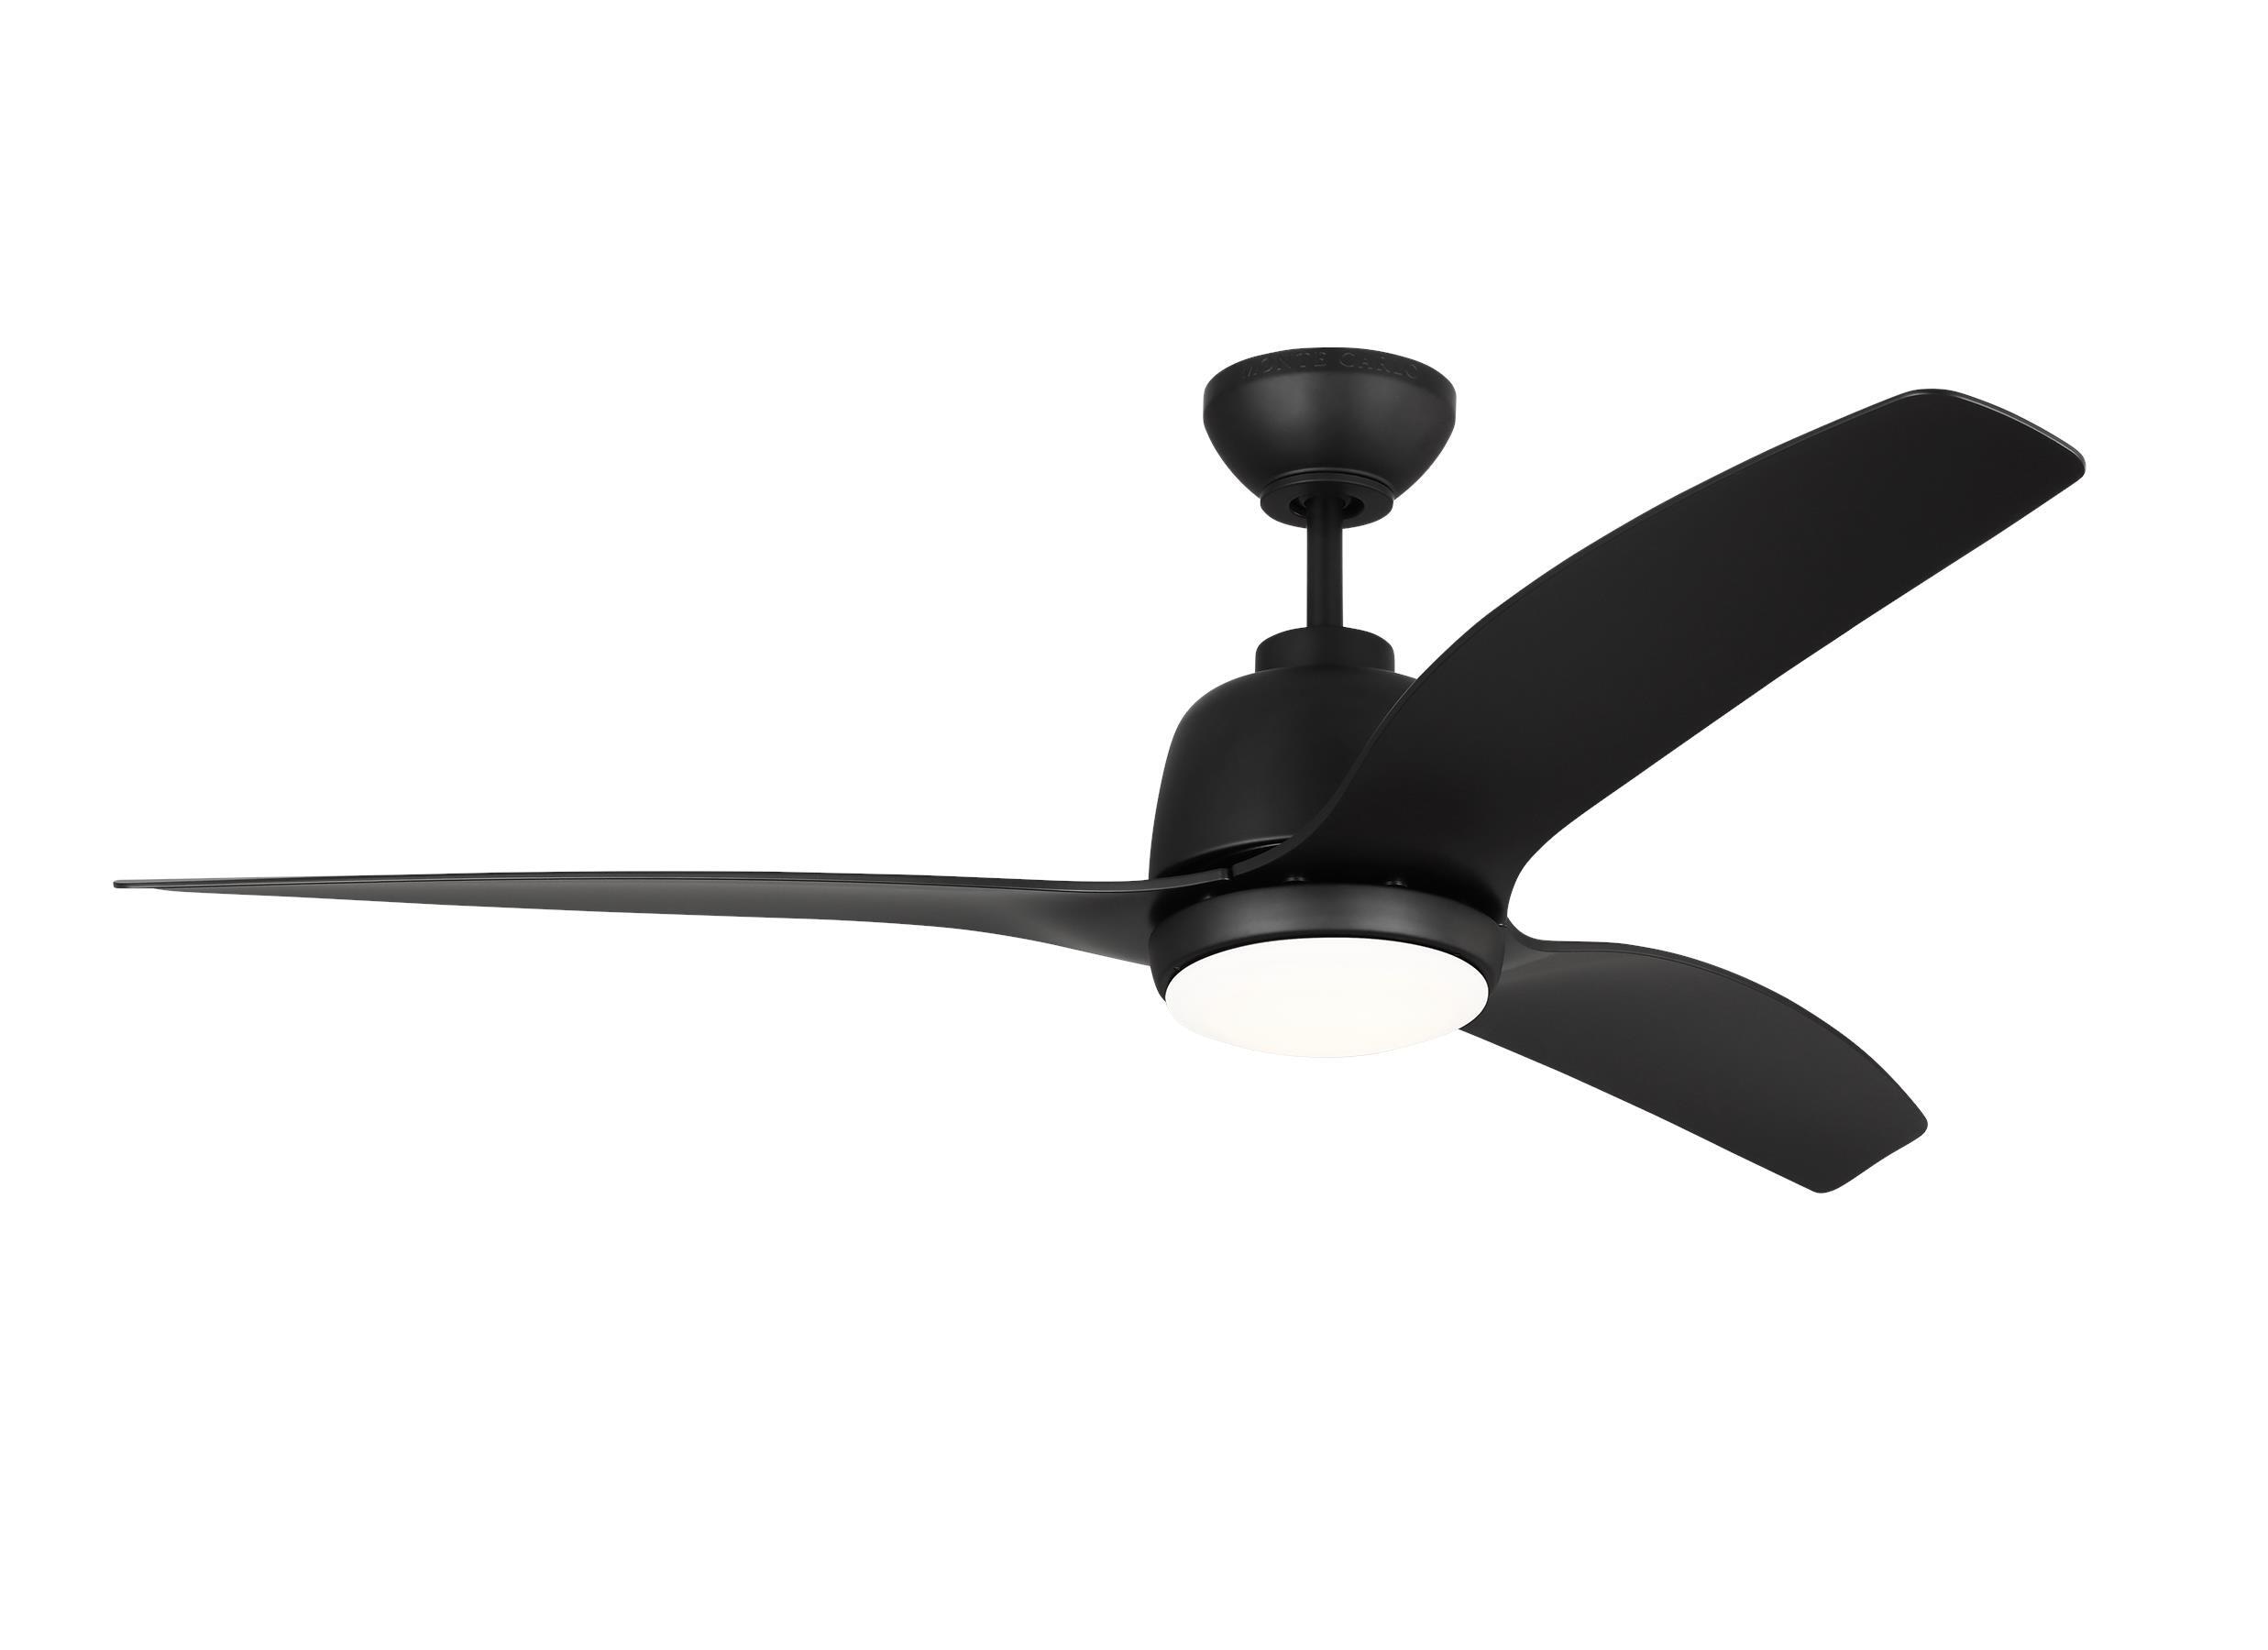 NEW CEILING FAN AIR LIGHT FRESH SUMMER ROOM HOME 3 SPEED REMOTE 3 BLADES 52" 55W 